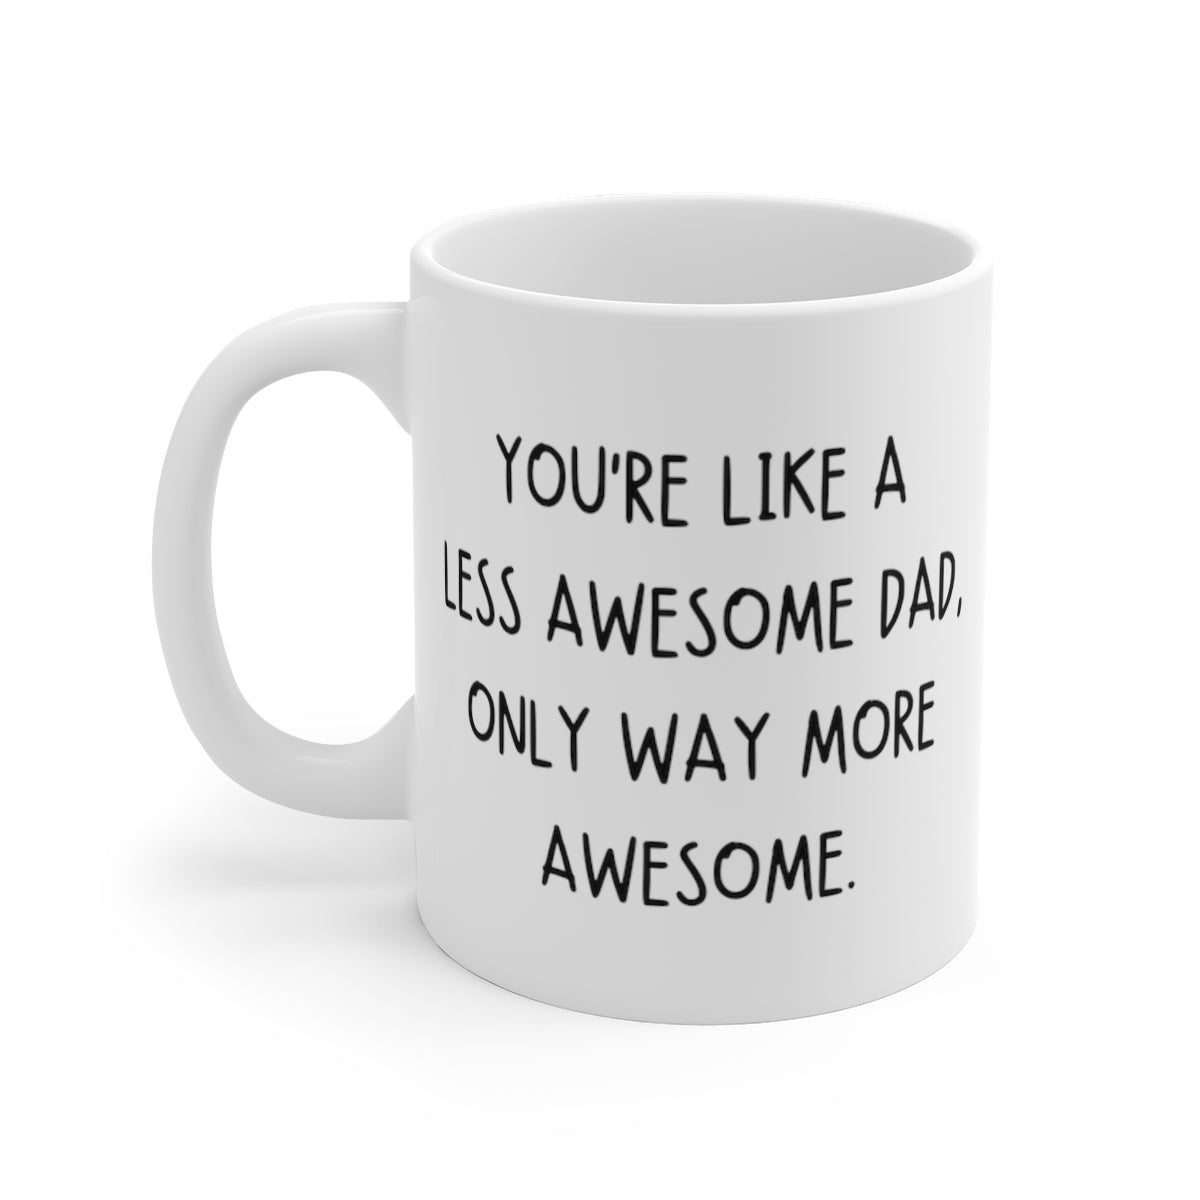 You're Like A Less Awesome Dad, Only Way More Awesome | Funny, Snarky Gift | White Ceramic Mug, Handwritten Font